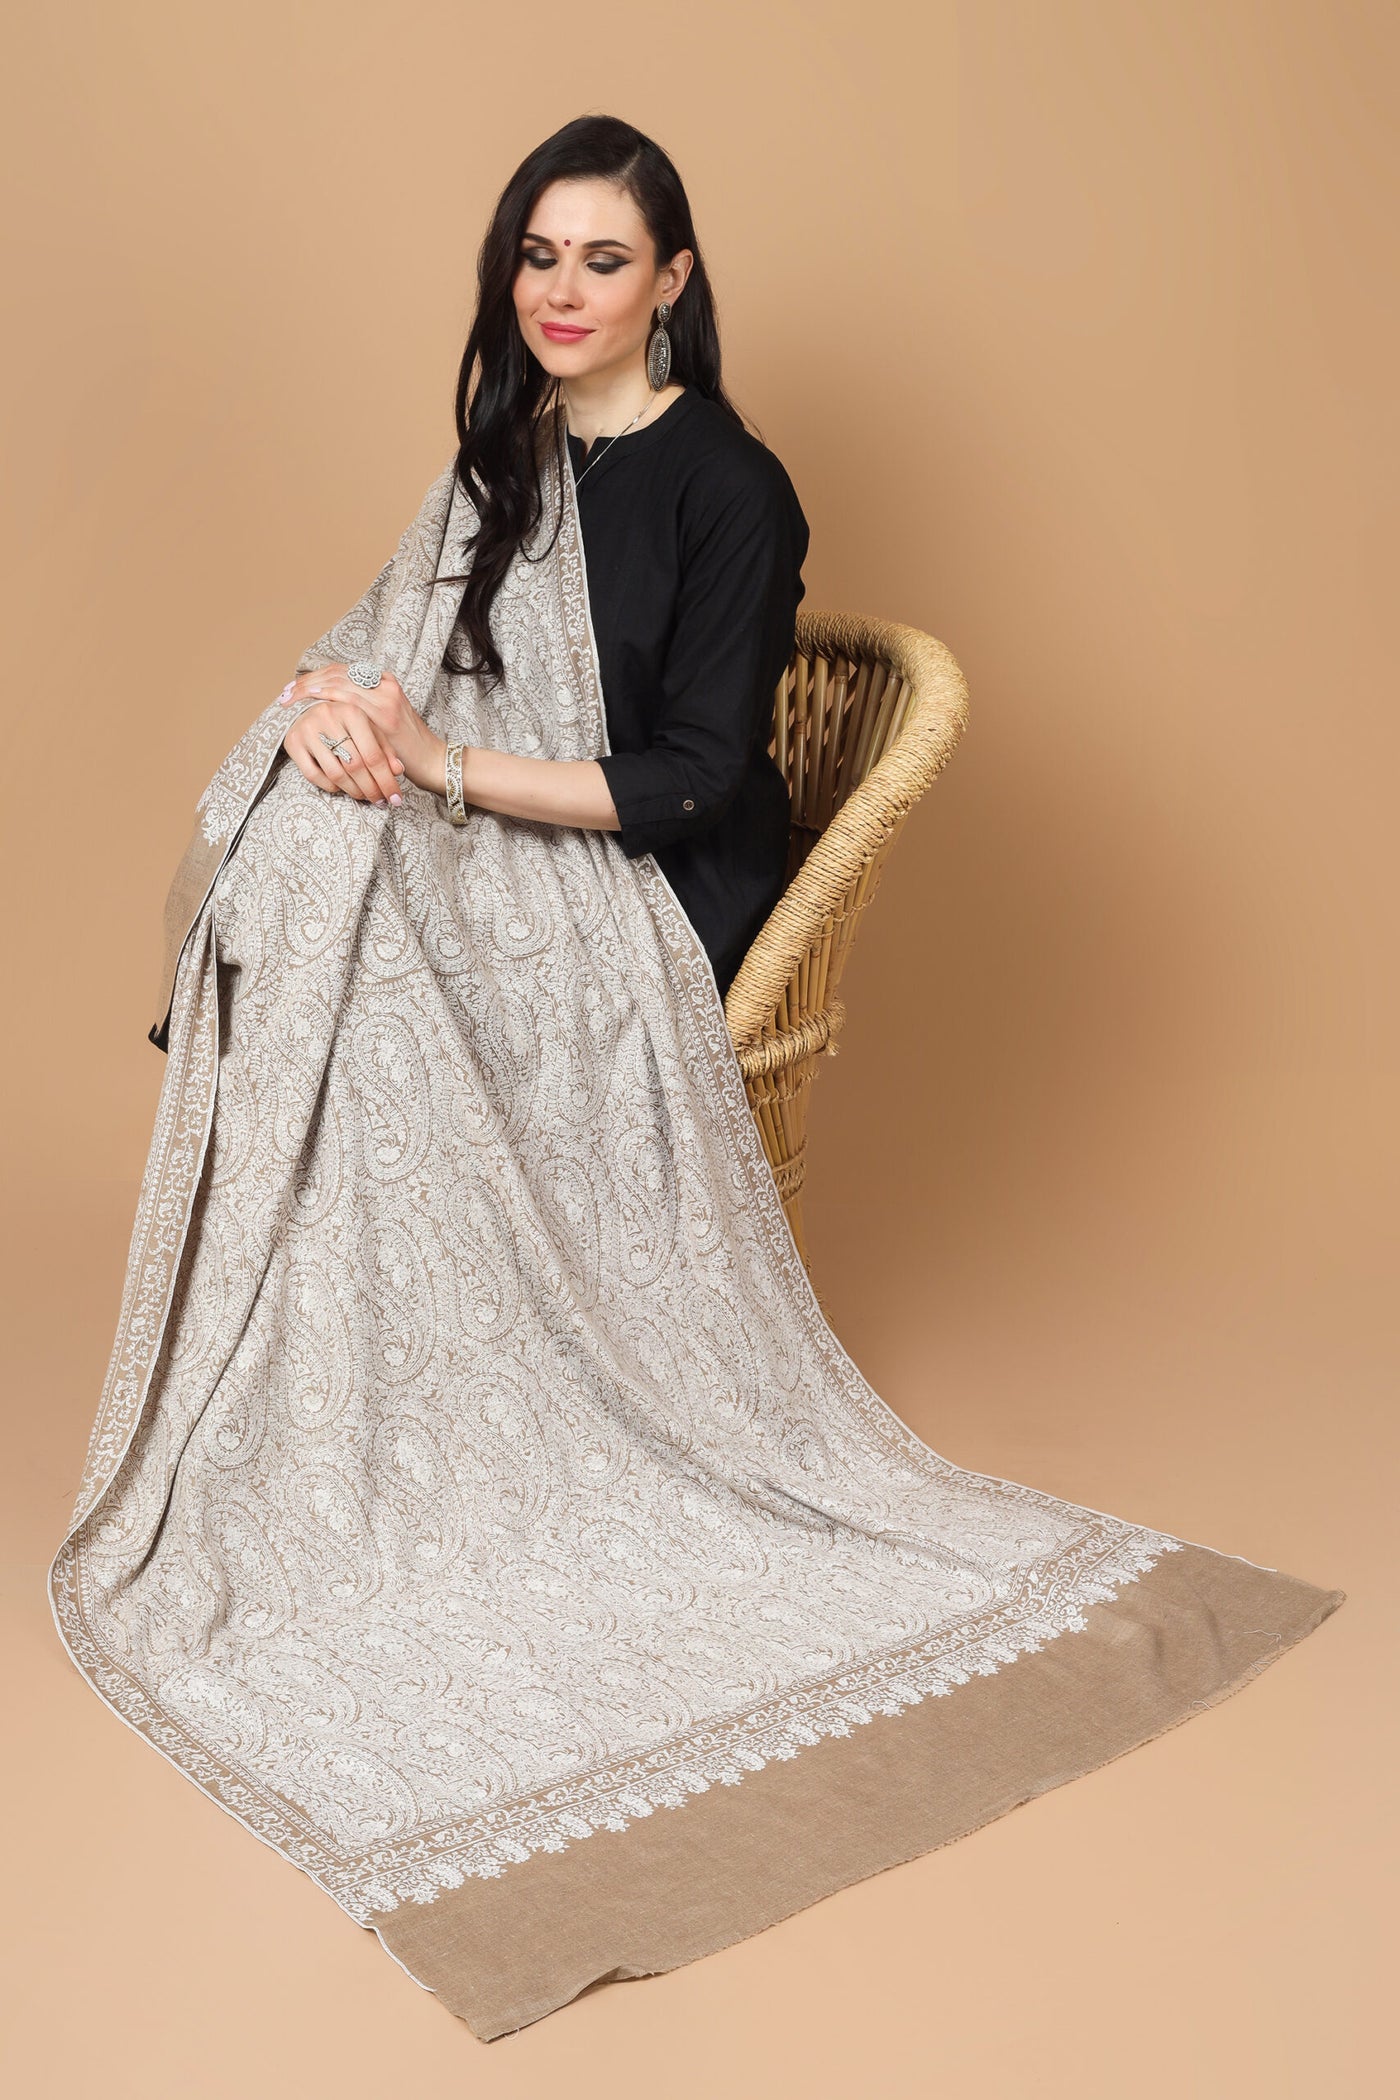  the garment of praise, a versatile piece of art with alluring Sozni embroidery. This natural (khudrang) Pure Pashmina Shawl with white Sozni Jama Hand-Embroidery